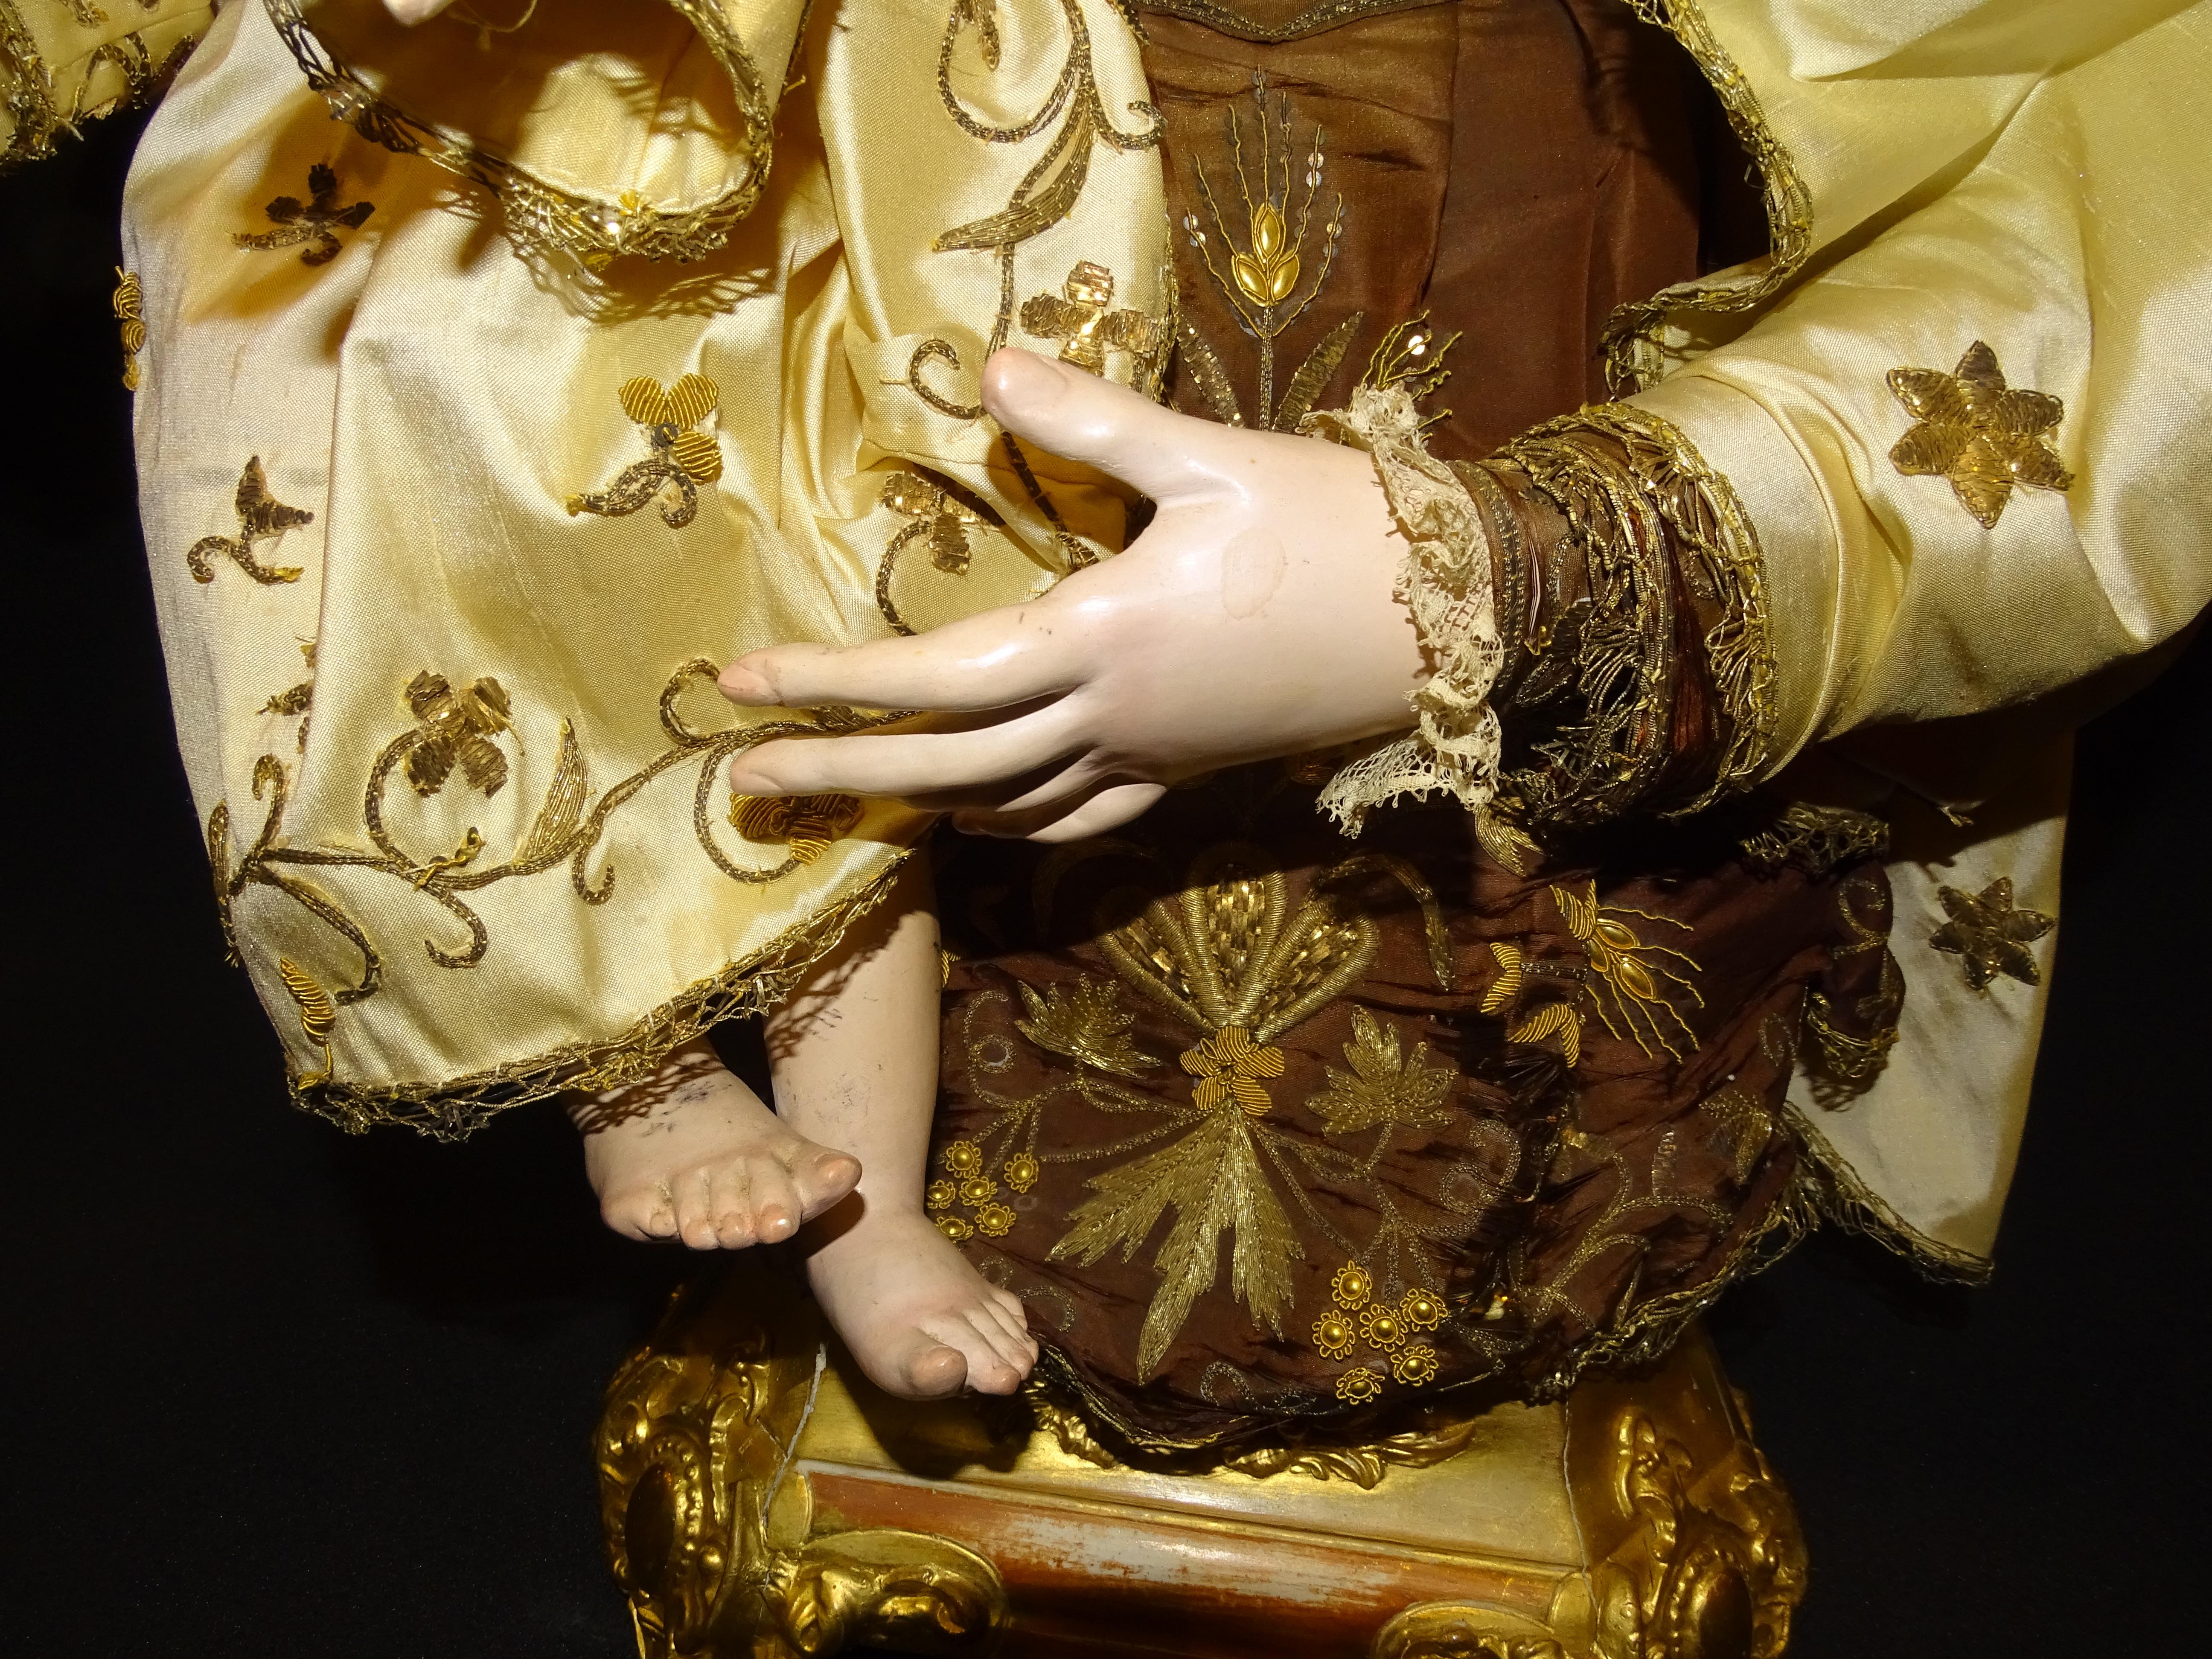 Baroque Neapolitan Scupture of a Virgin with the Child Jesus, Nativity